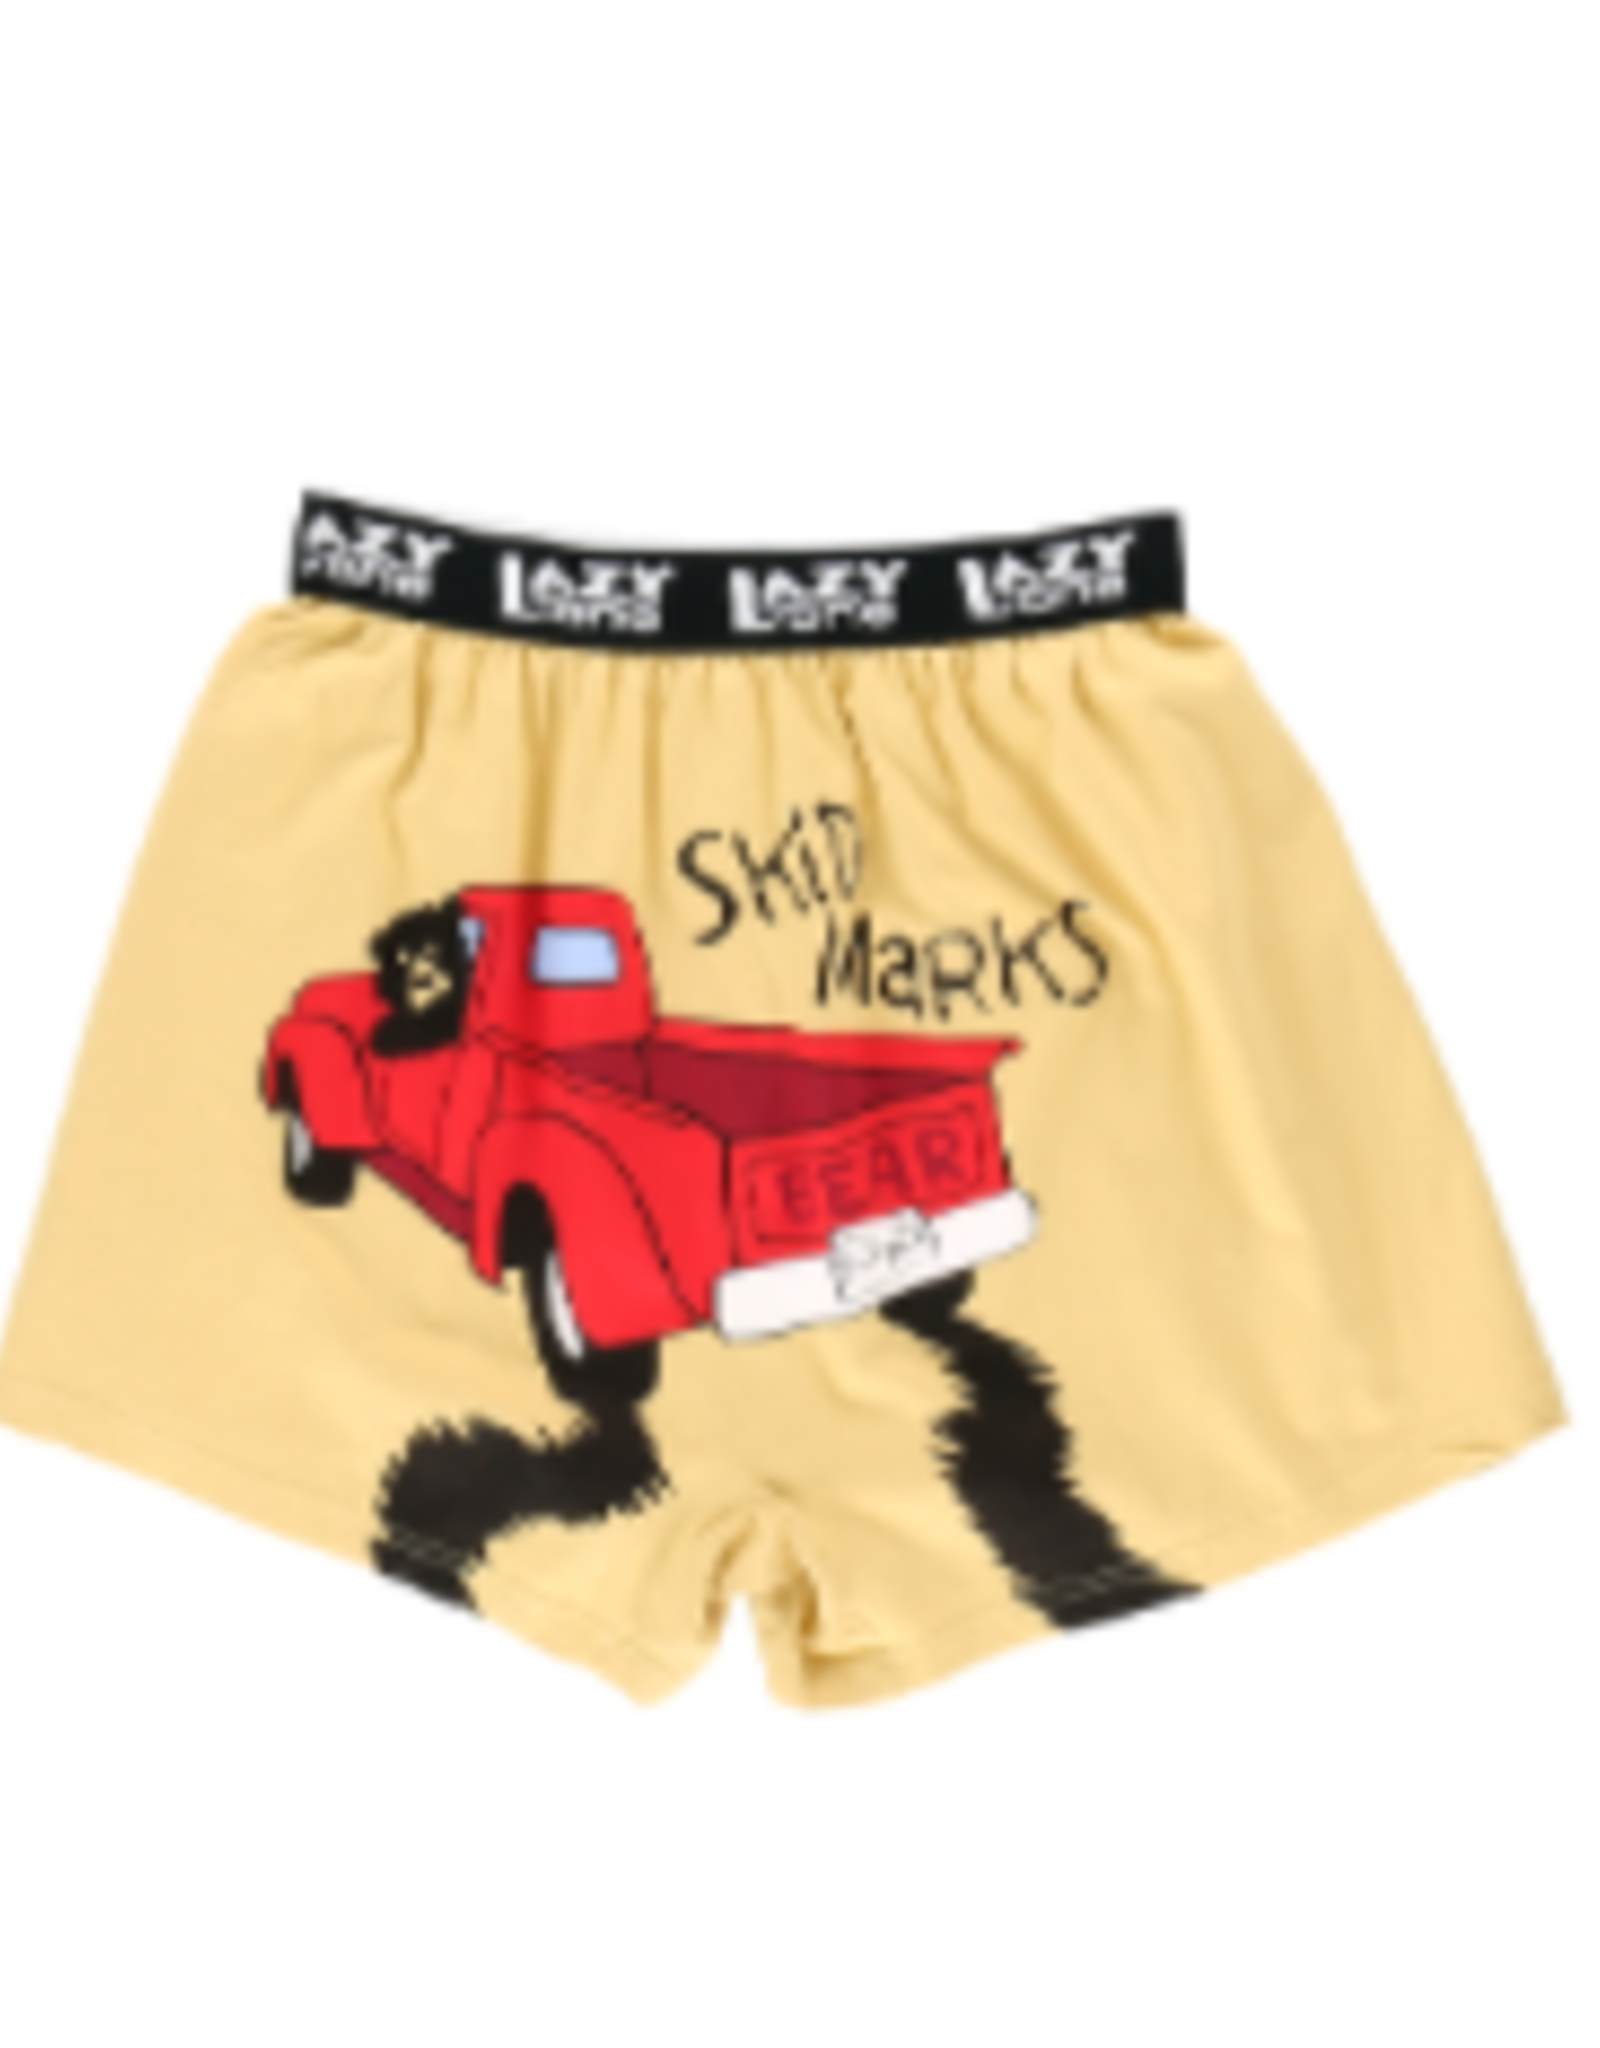 Mens Lazy One - Skid Marks Boxer Briefs   (M)